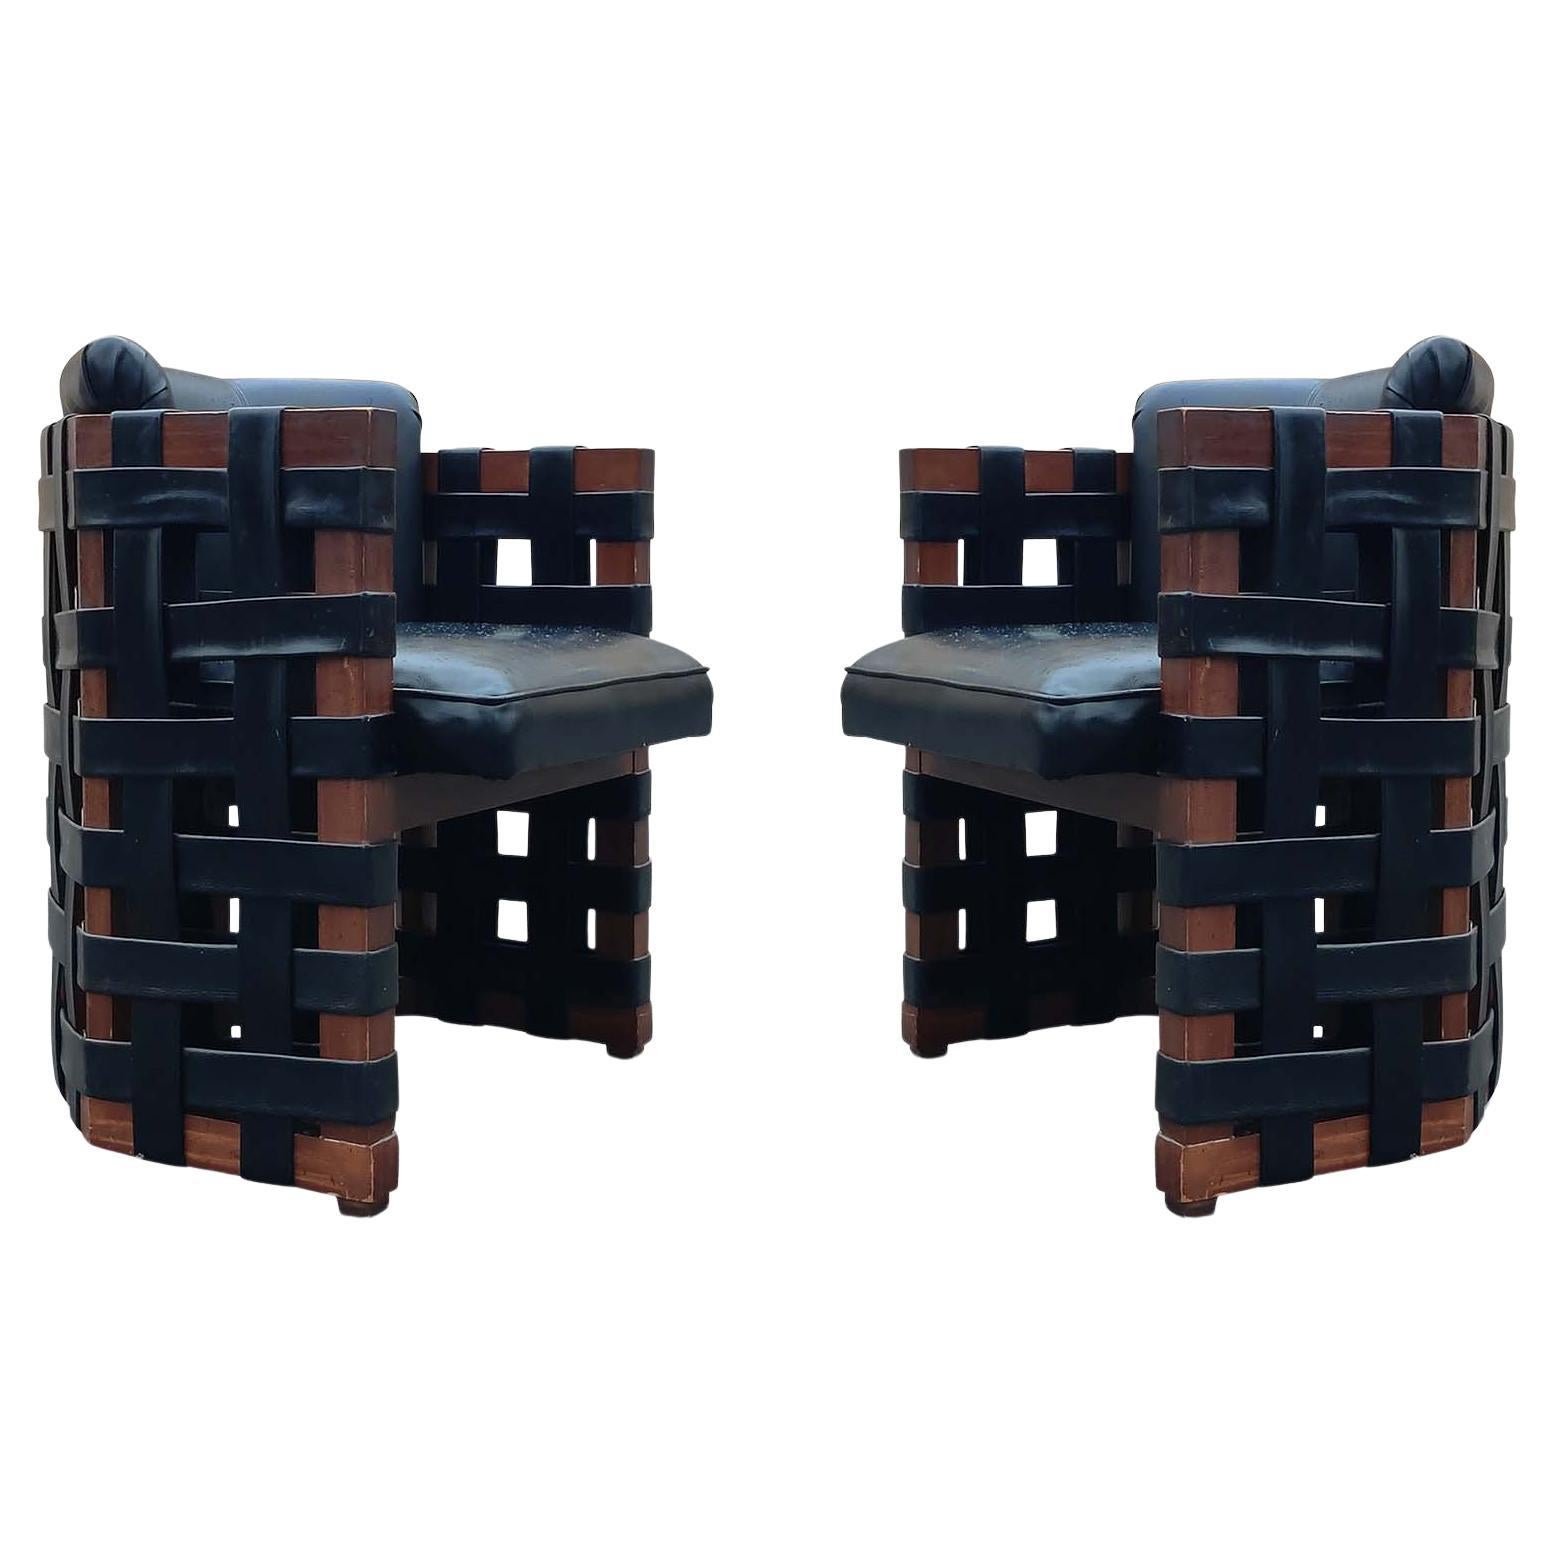 Pair of Brutalist Armchairs Woven Strap Leatherette Wood Frames, Circa 1960s